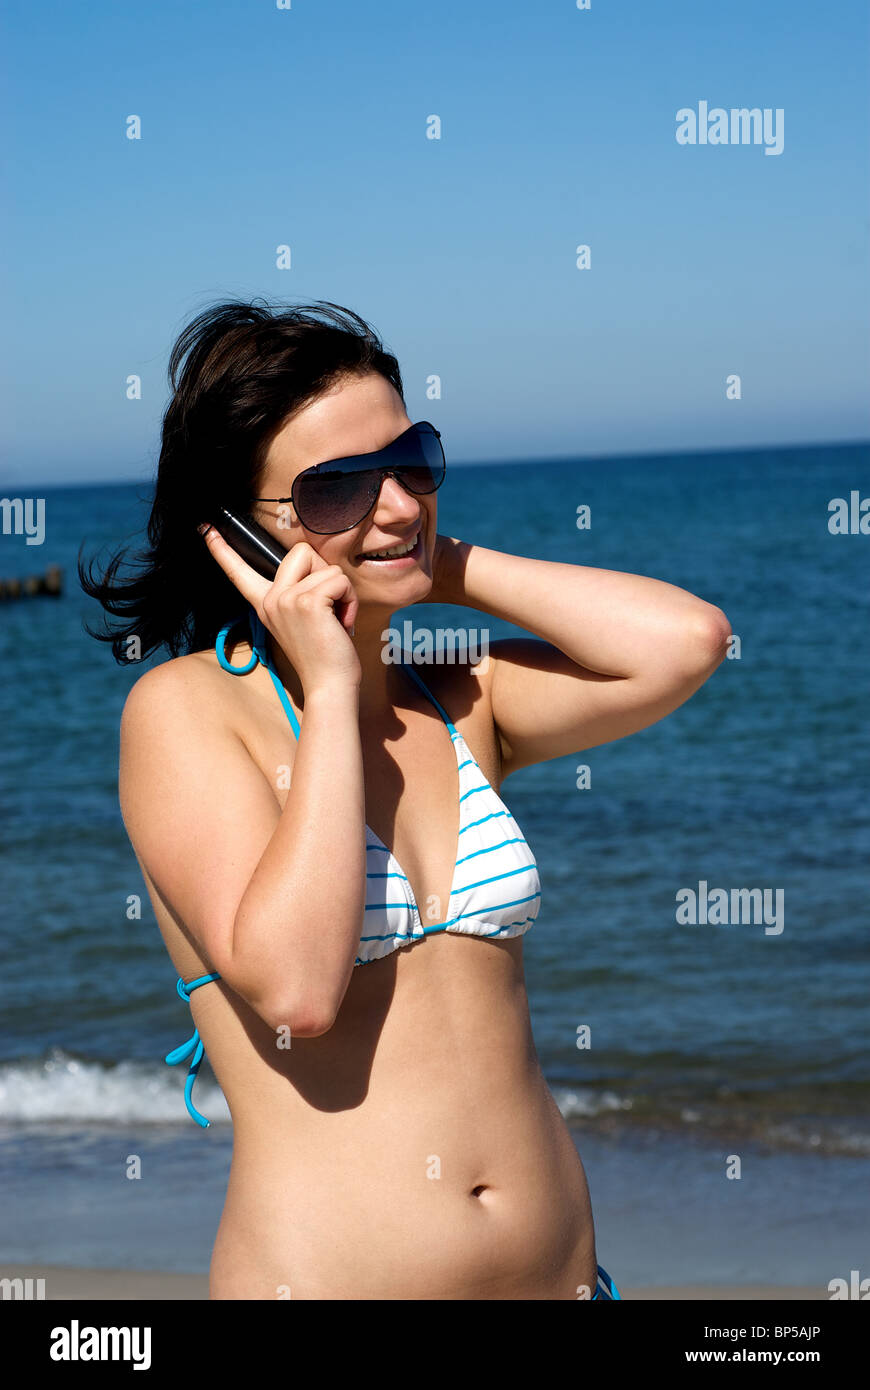 A young woman speaking on the phone on the beach Stock Photo